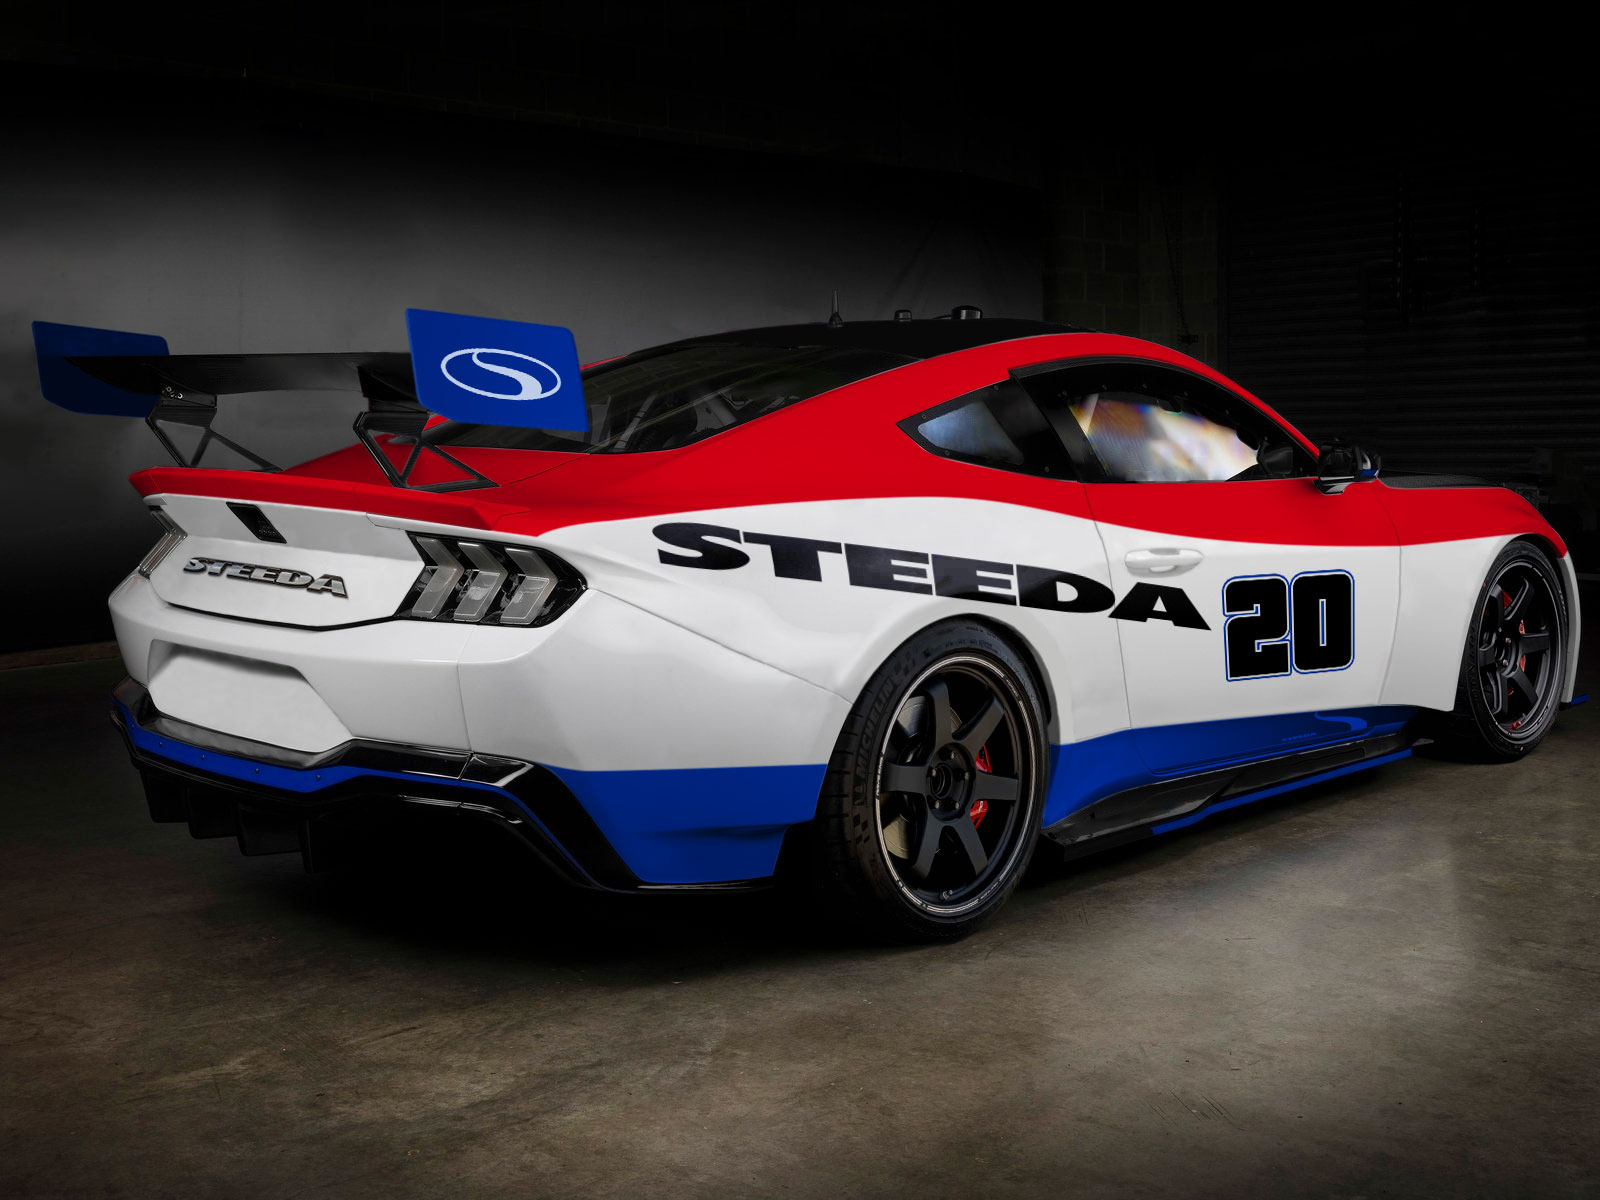 S650 Mustang Hello From Steeda! 20raceCar-newLivery-back (2)